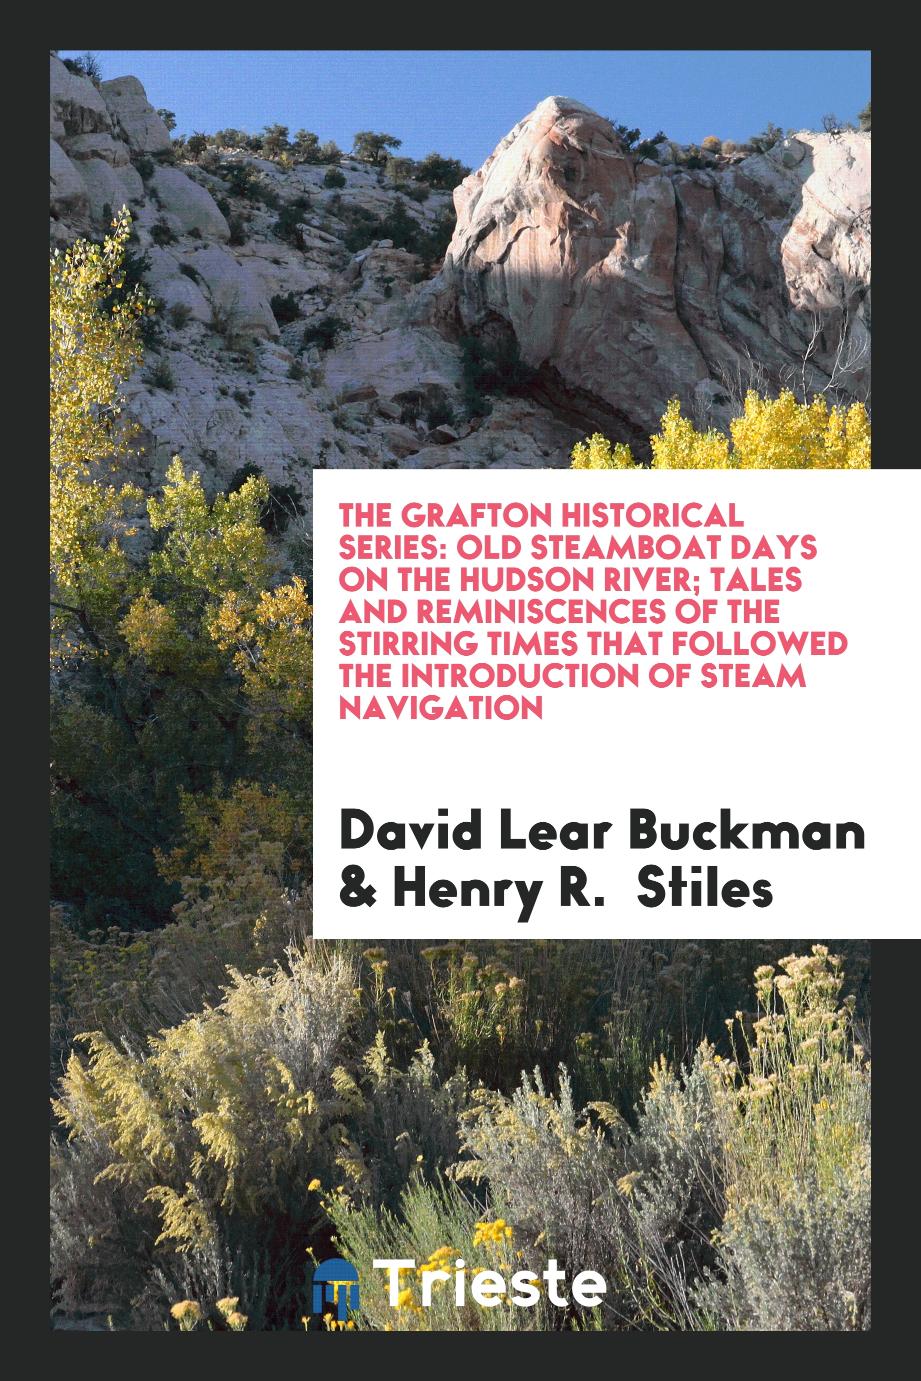 The Grafton Historical Series: Old Steamboat Days on the Hudson River; Tales and Reminiscences of the Stirring Times That Followed the Introduction of Steam Navigation